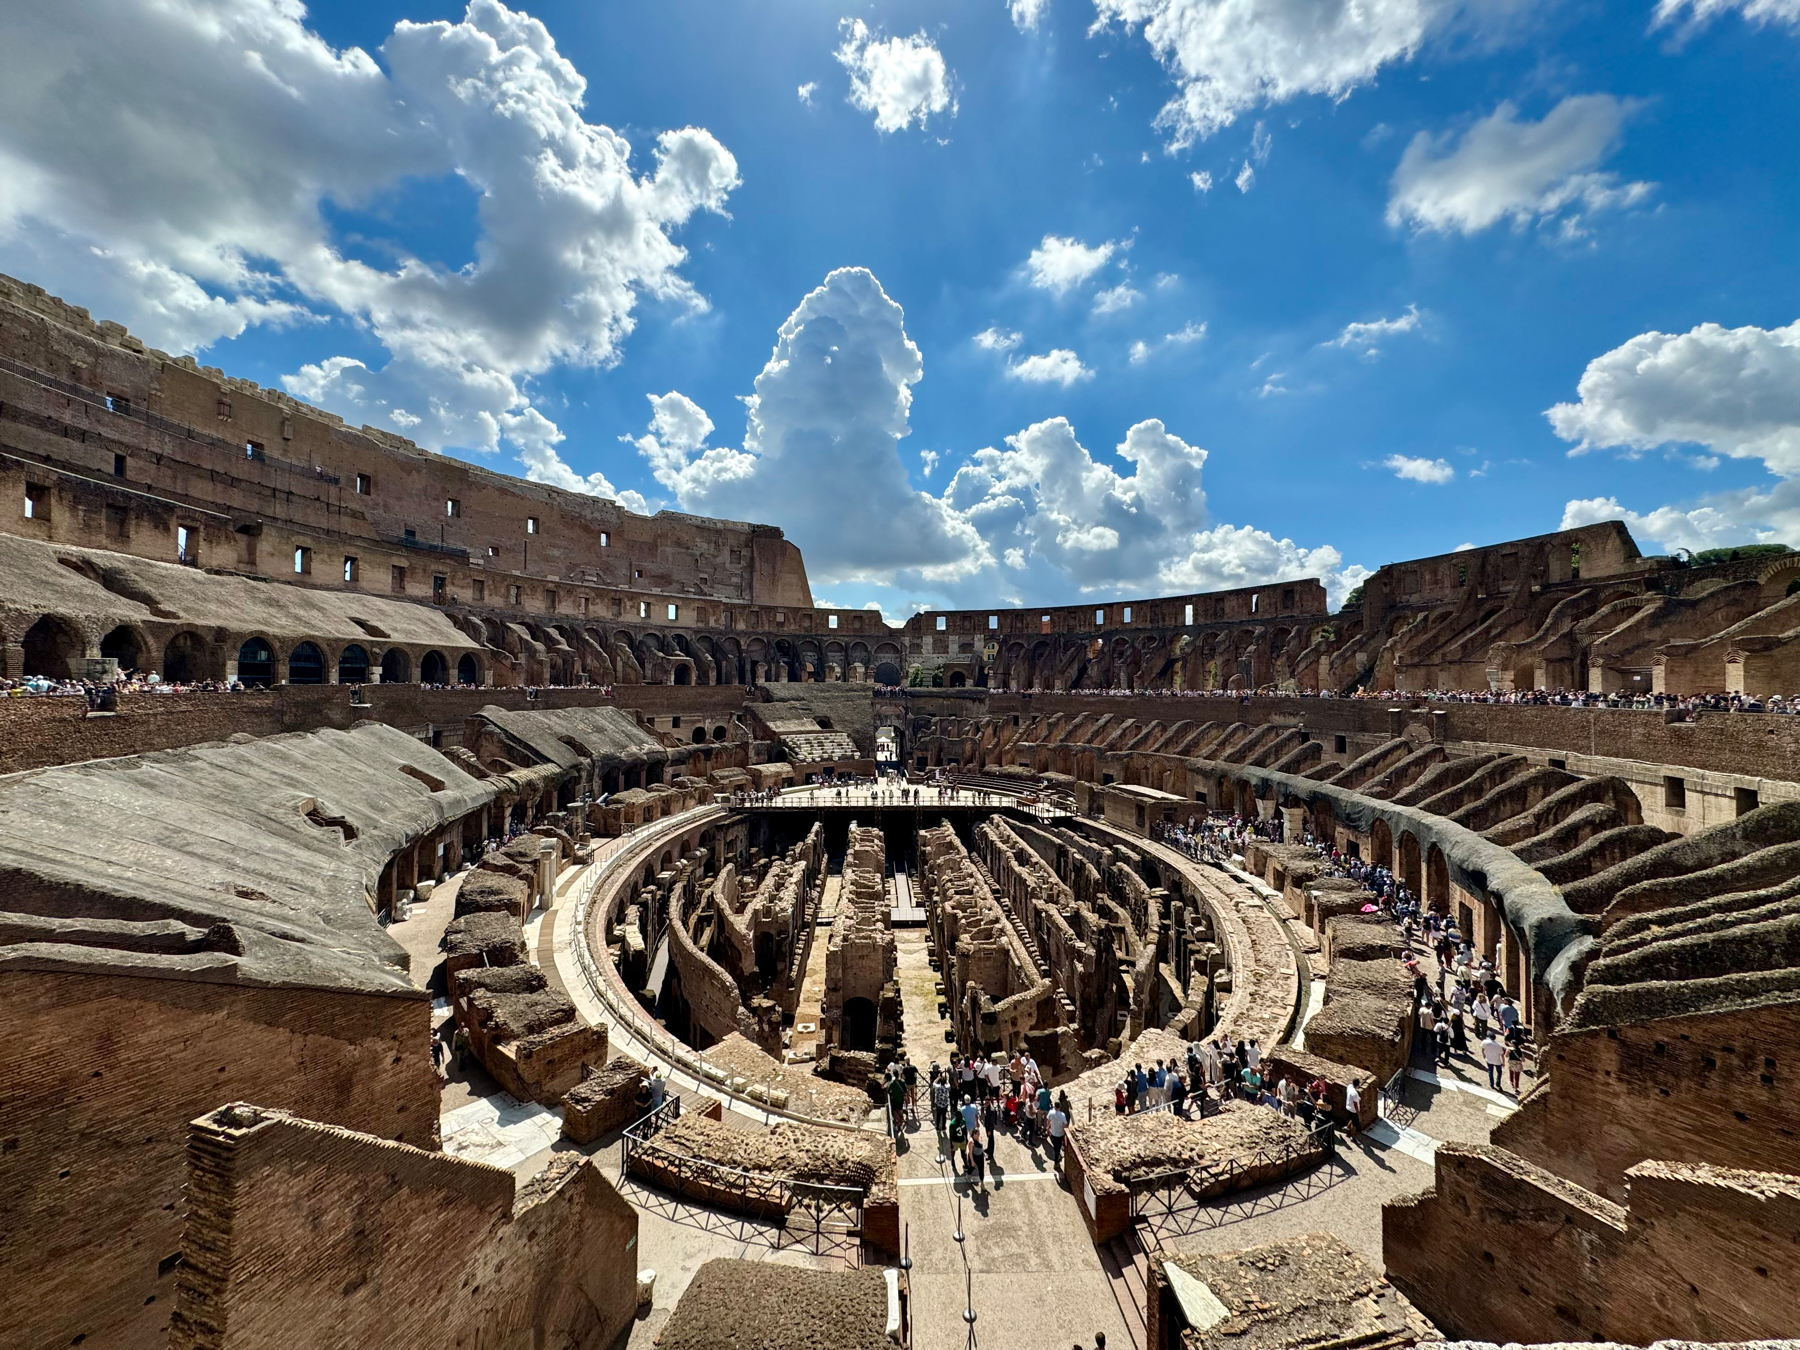 Image of the interior of the Colosseum in Rome, Italy. The structure is partially intact with exposed ancient stone and numerous arches. Visitors are seen walking through the ruins and pathways within the Colosseum under a blue sky filled with scattered clouds.